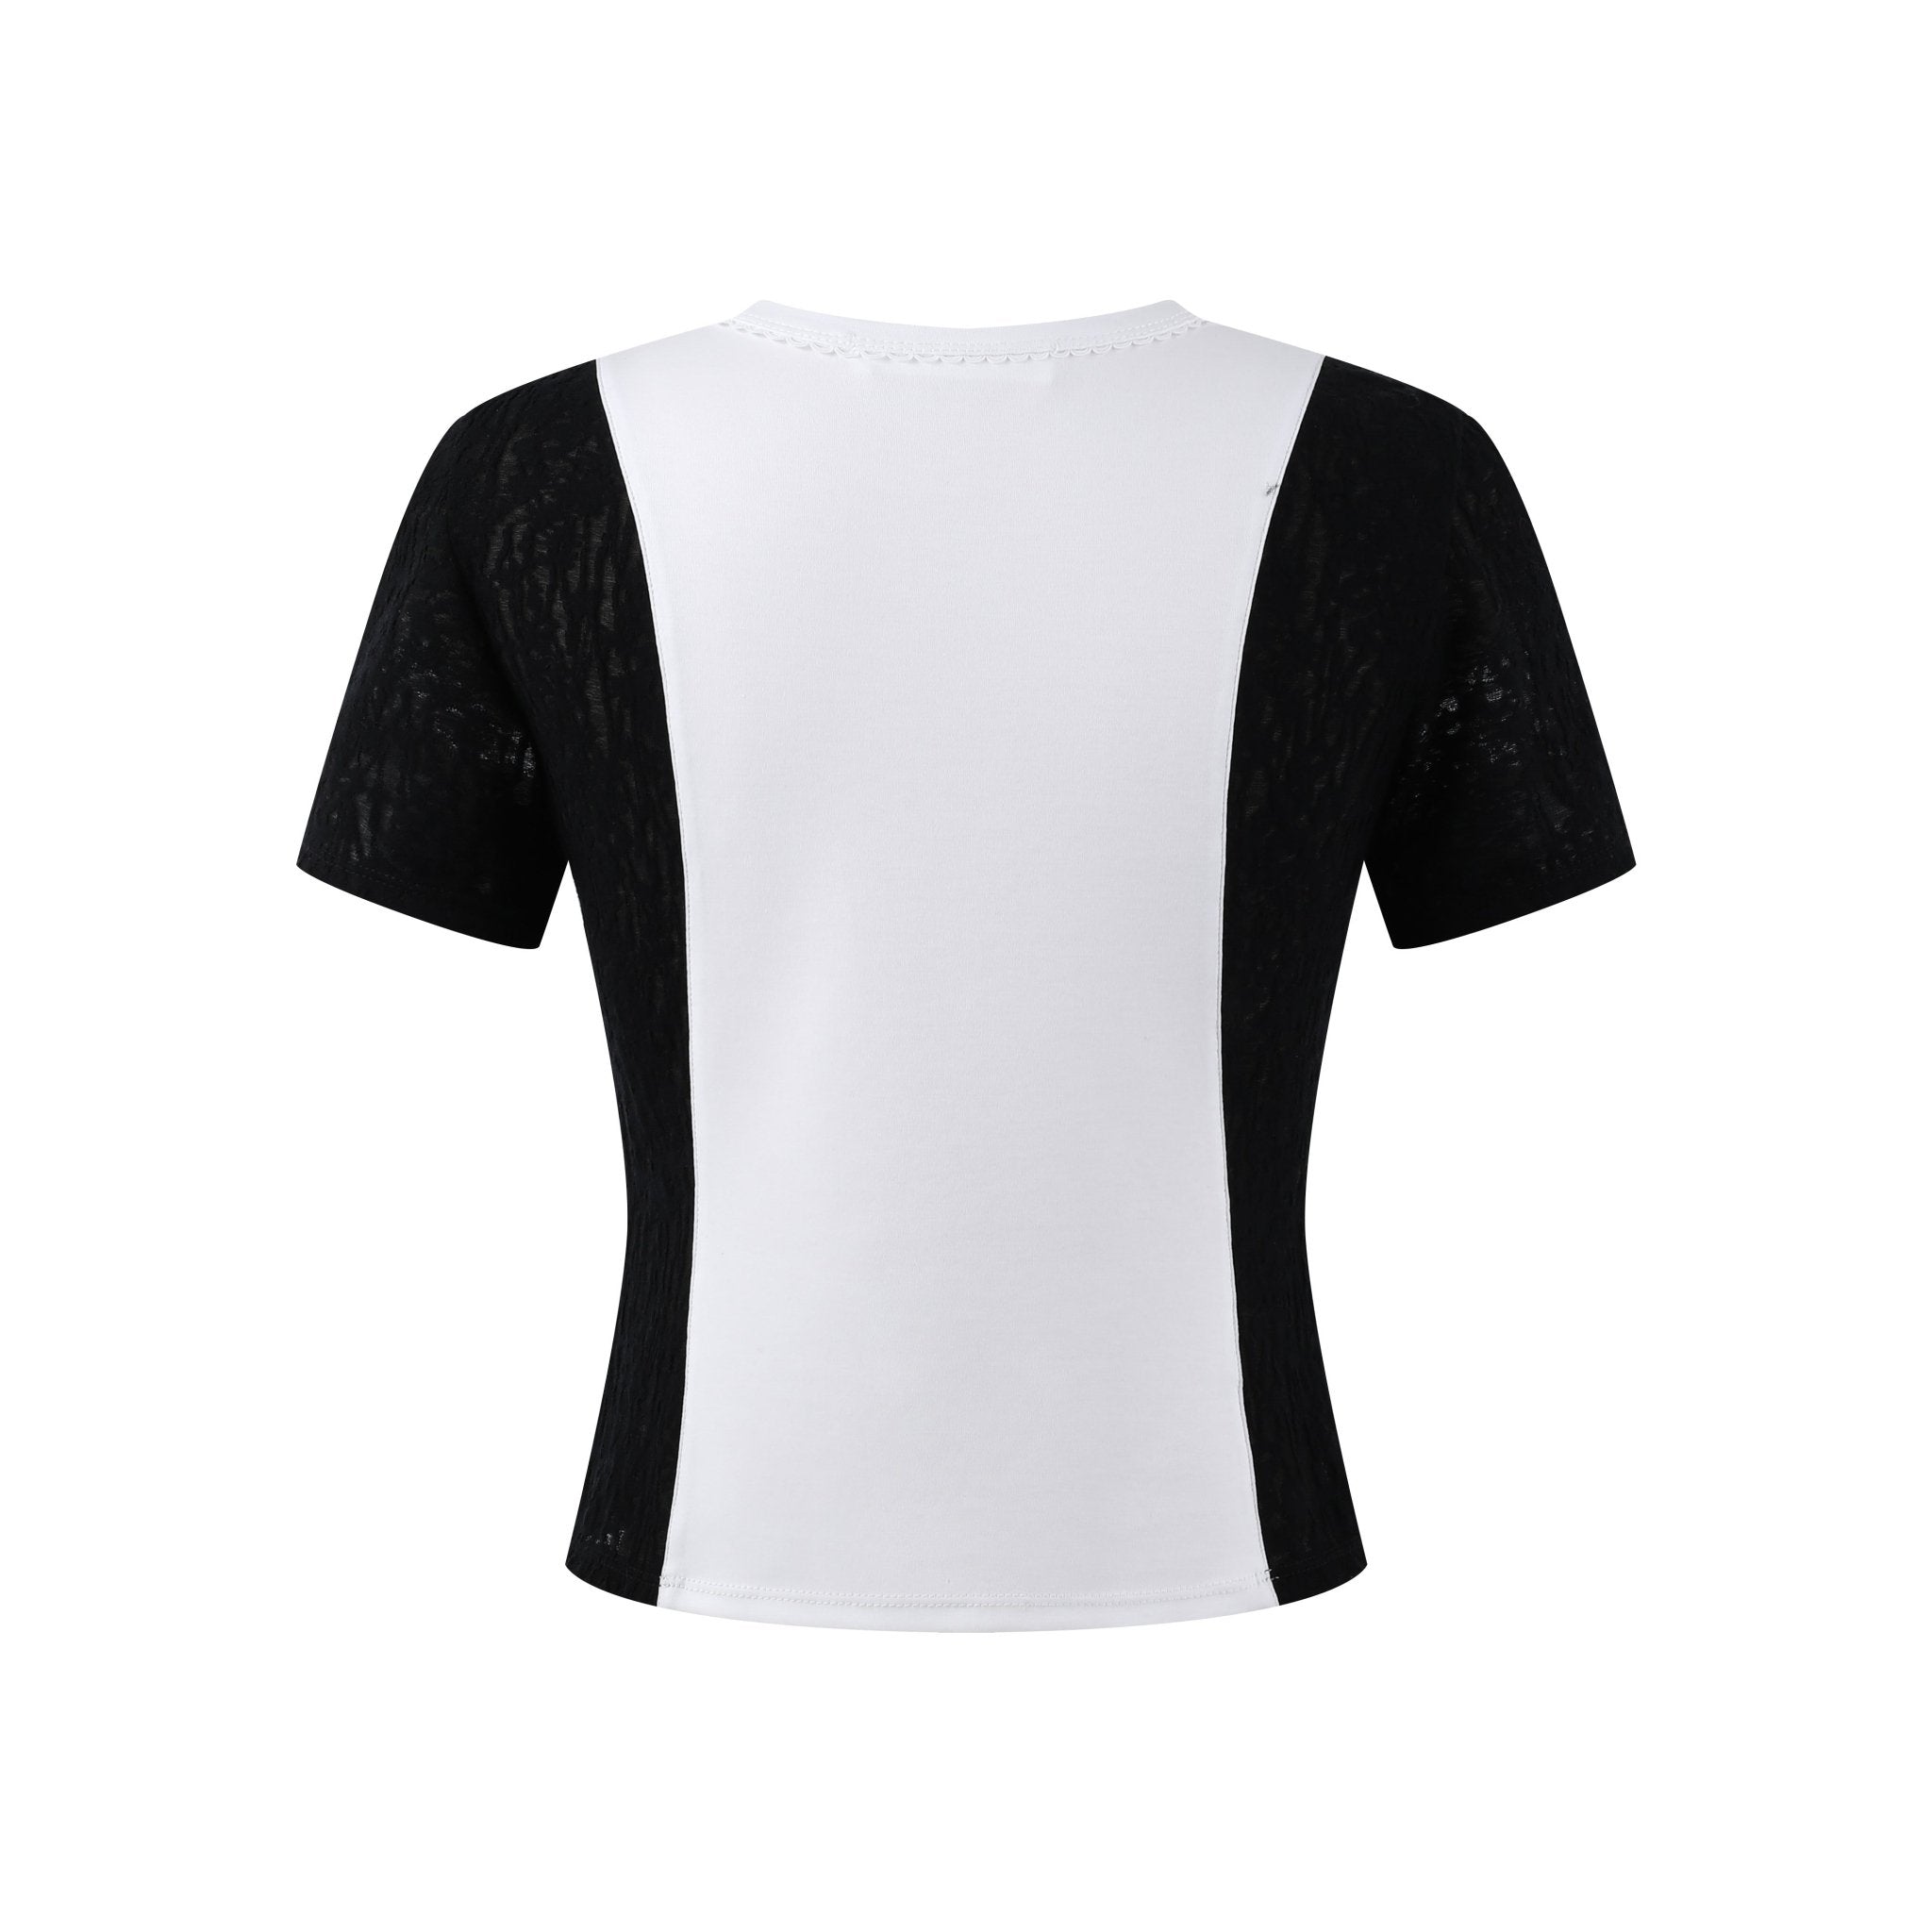 THREE QUARTERS Black And White Colorblocked Waist Cinching Athletic T - Shirt | MADA IN CHINA